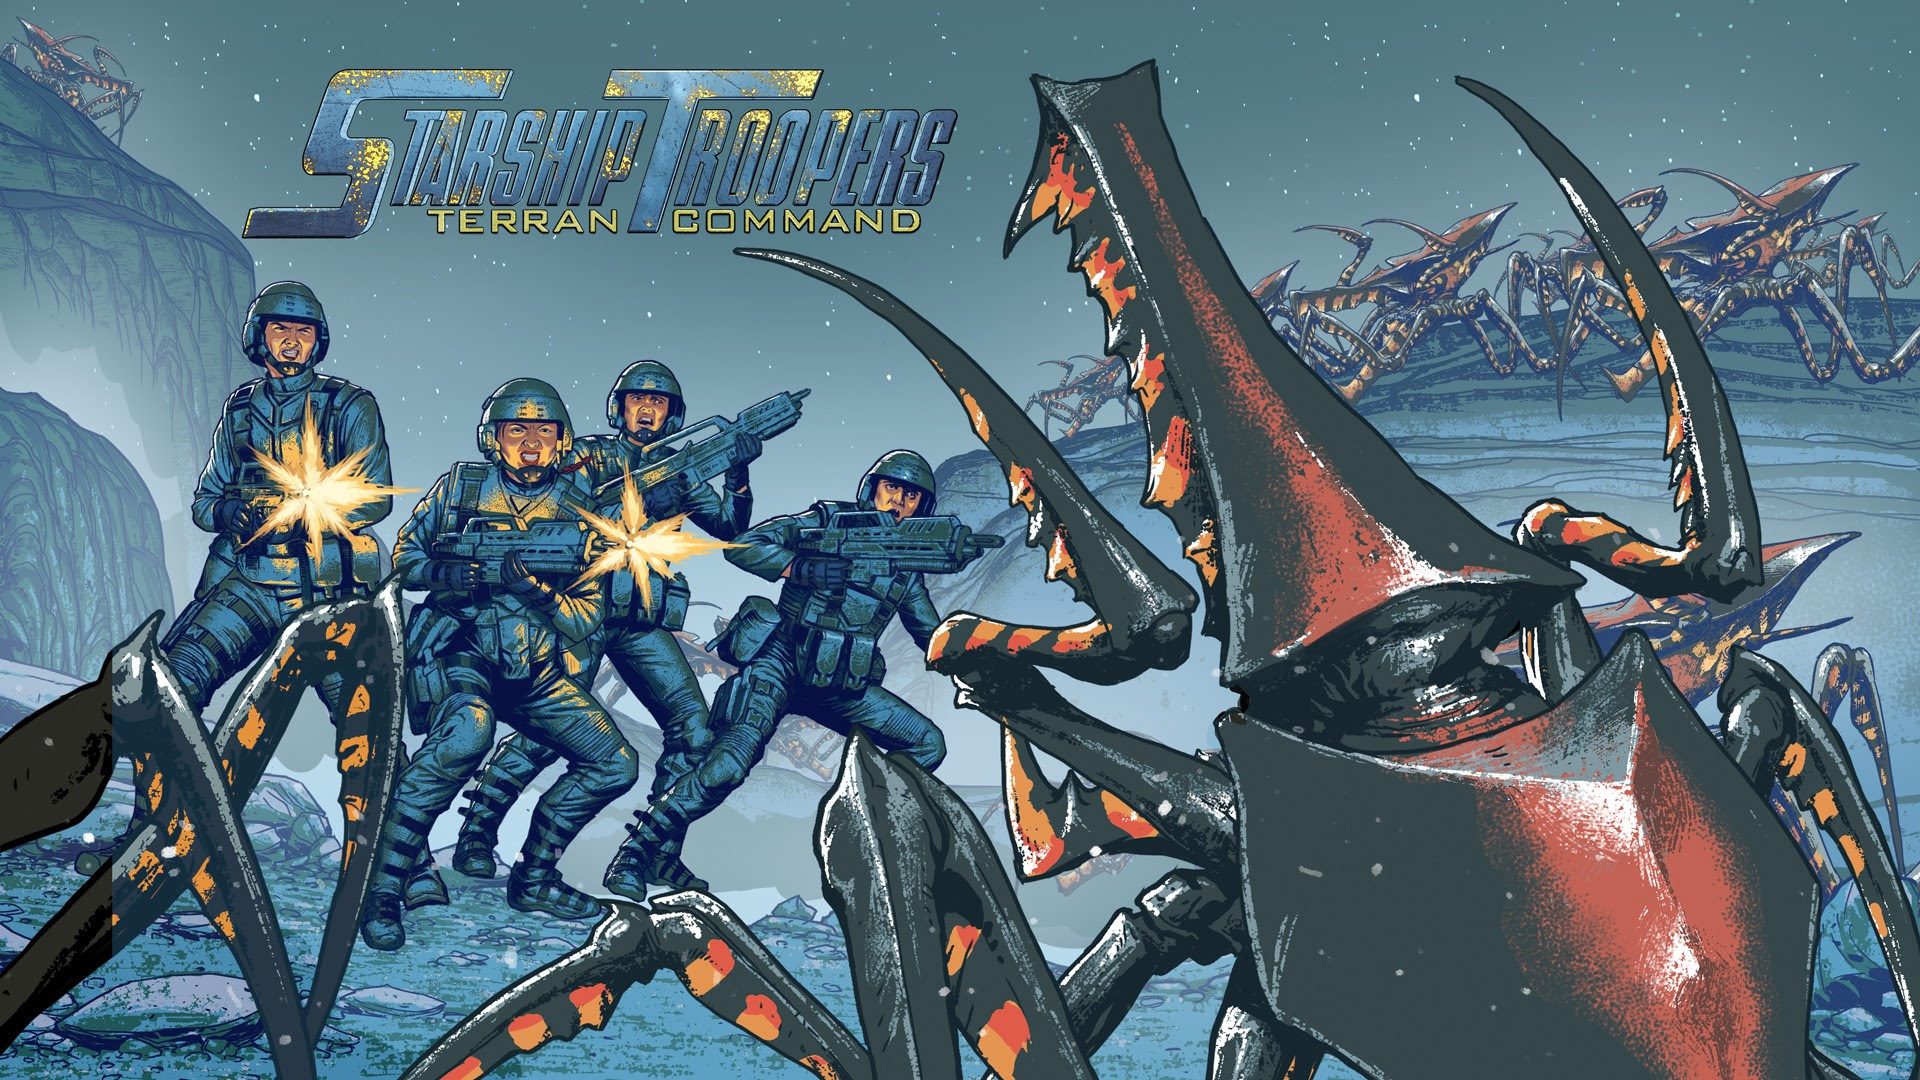 Starship Troopers – Terran Command Delayed